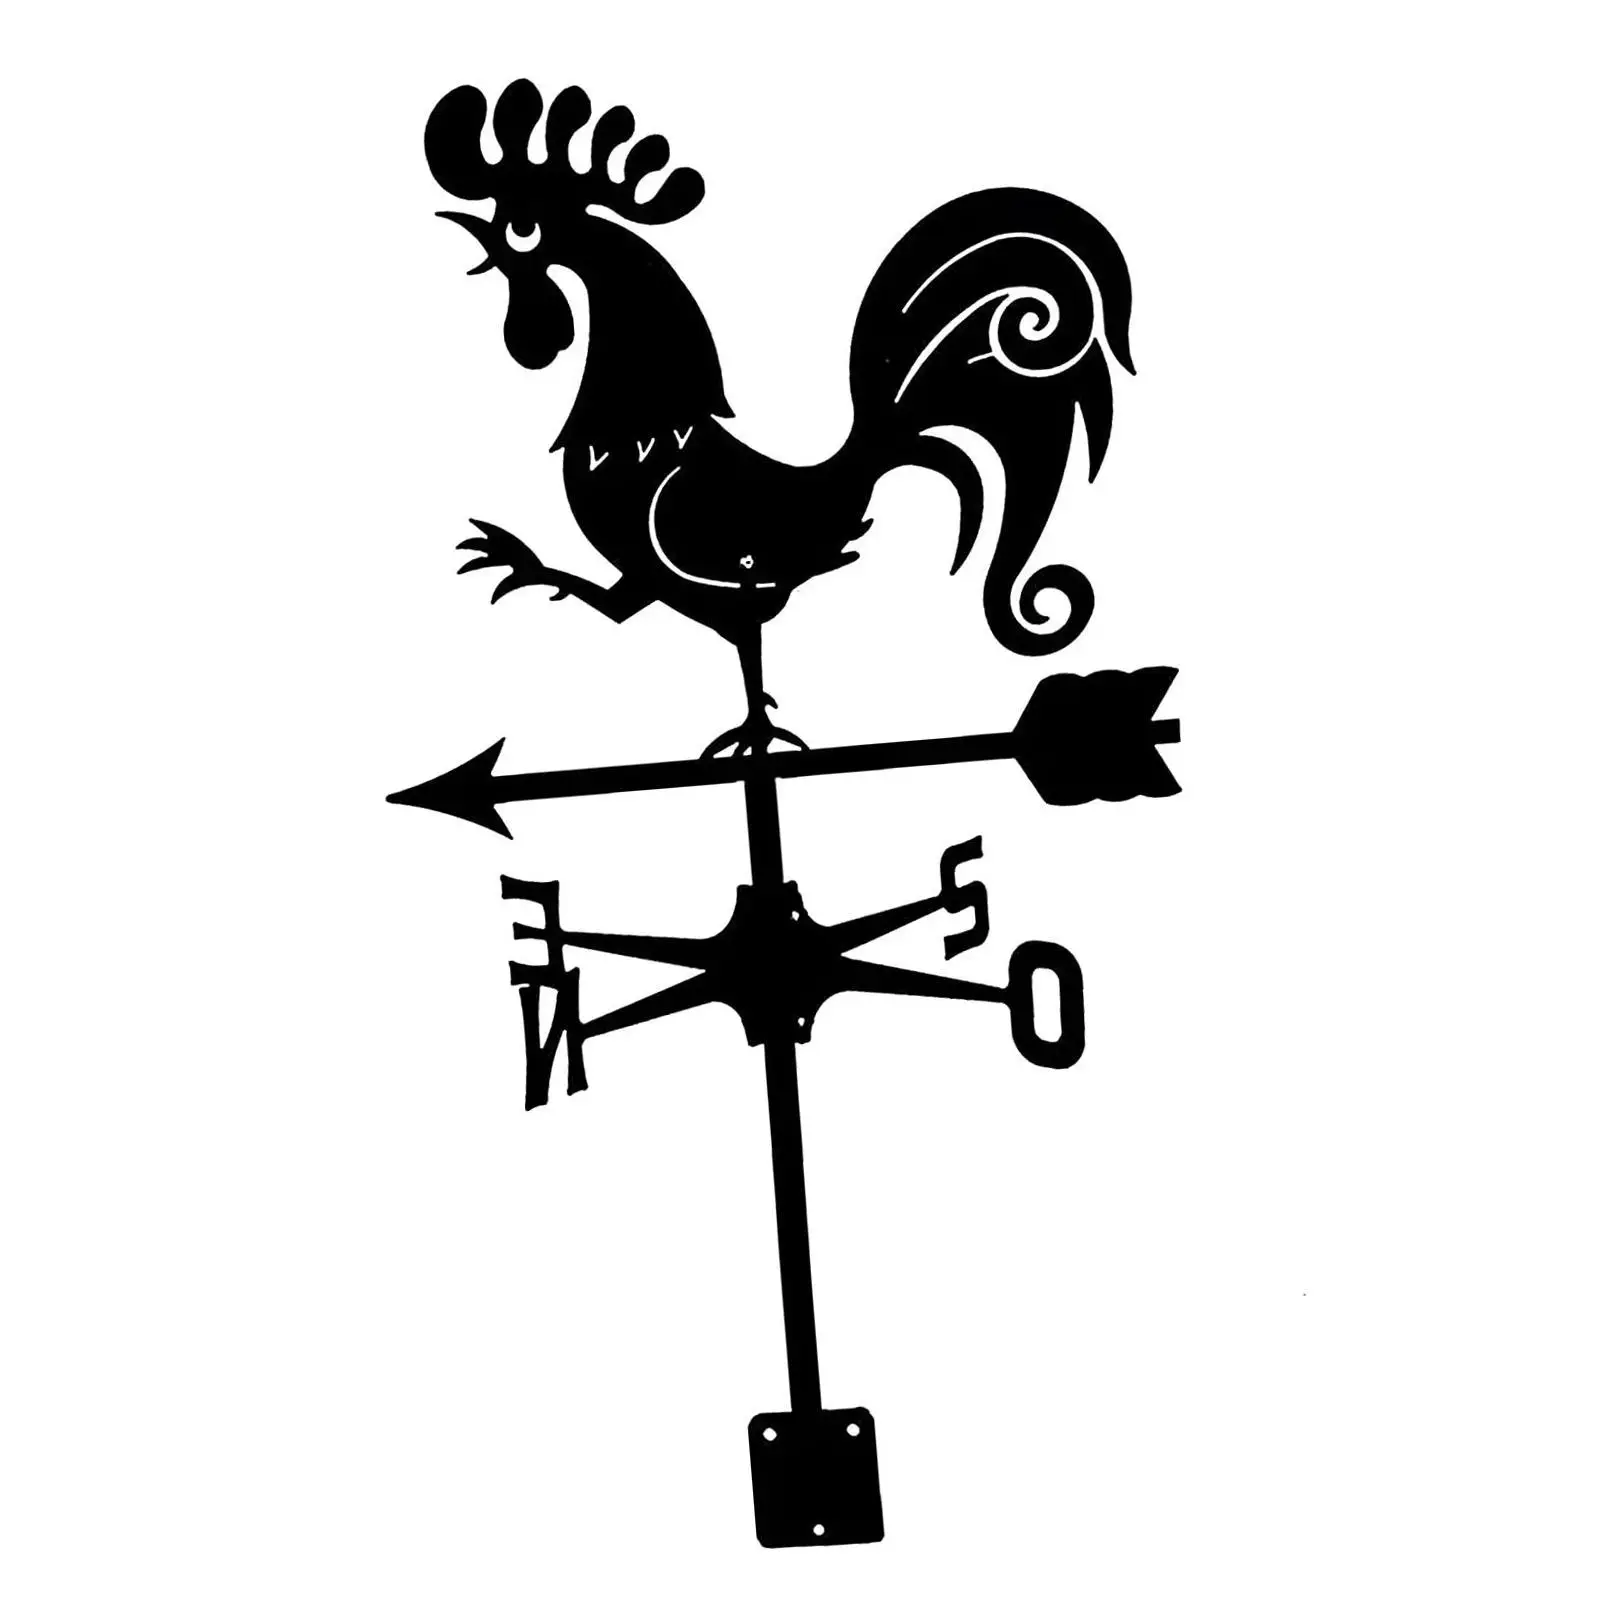 Wrought Iron Weathervane Classic Style Direction Indicator Weather Vane Outdoor Scene Ornament for Lawn Cupola Garden Barn Decor